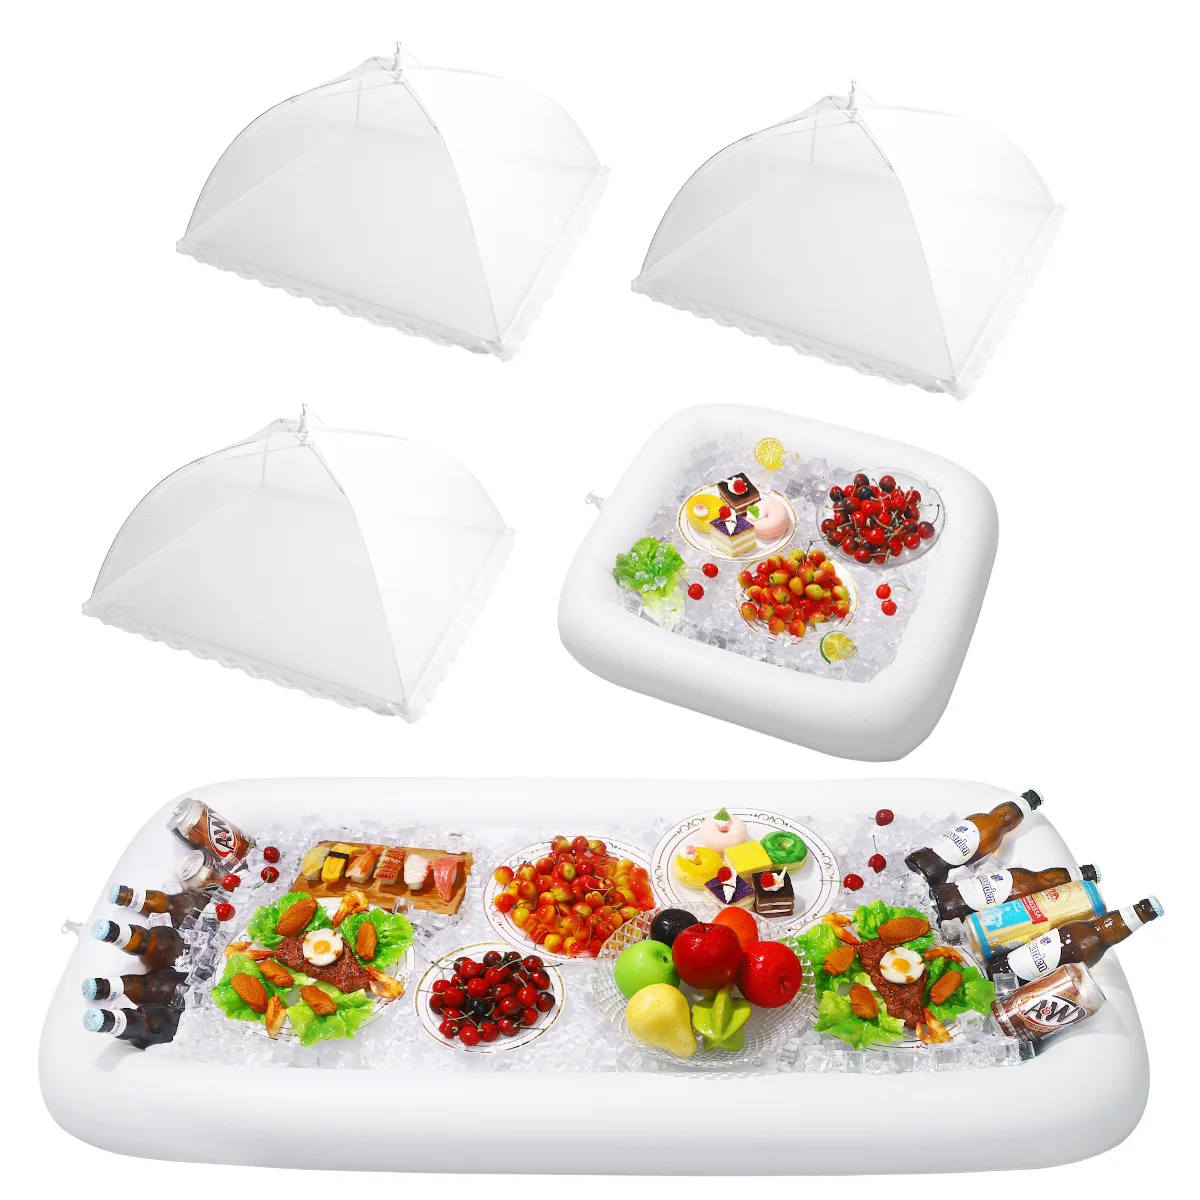 

Hemoton Inflatable Serving Bar and Mesh Food Tent Set Buffet Salad Fruit Plate Tray Food Drink Holder for BBQ Picnic Pool